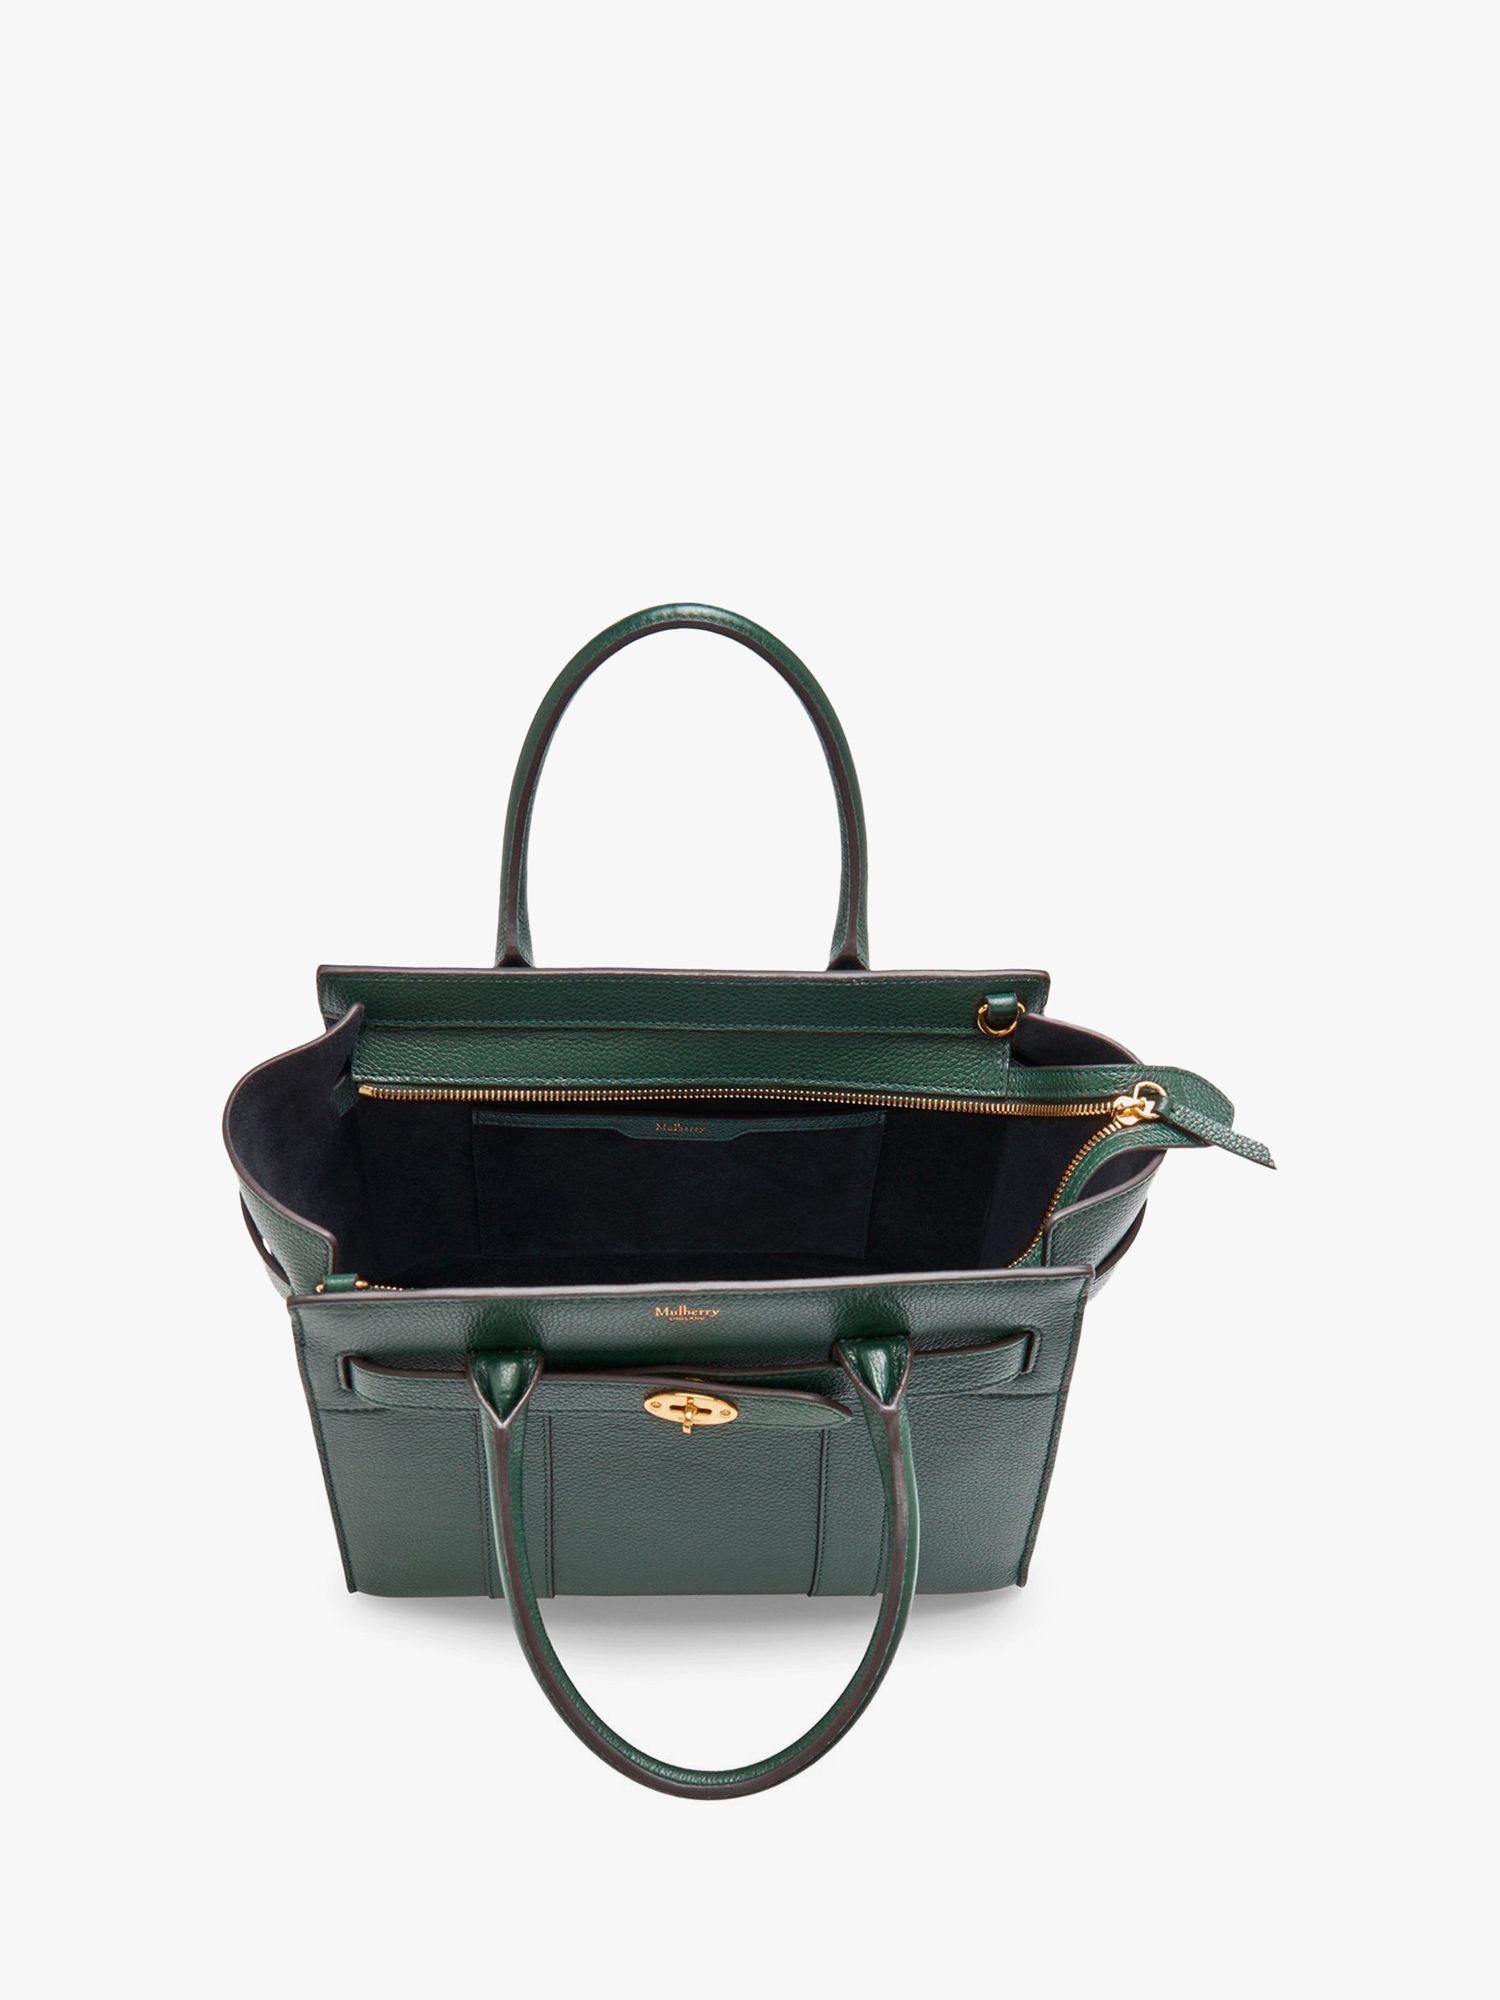 Buy Mulberry Small Bayswater Zipped Classic Grain Leather Tote Bag Online at johnlewis.com